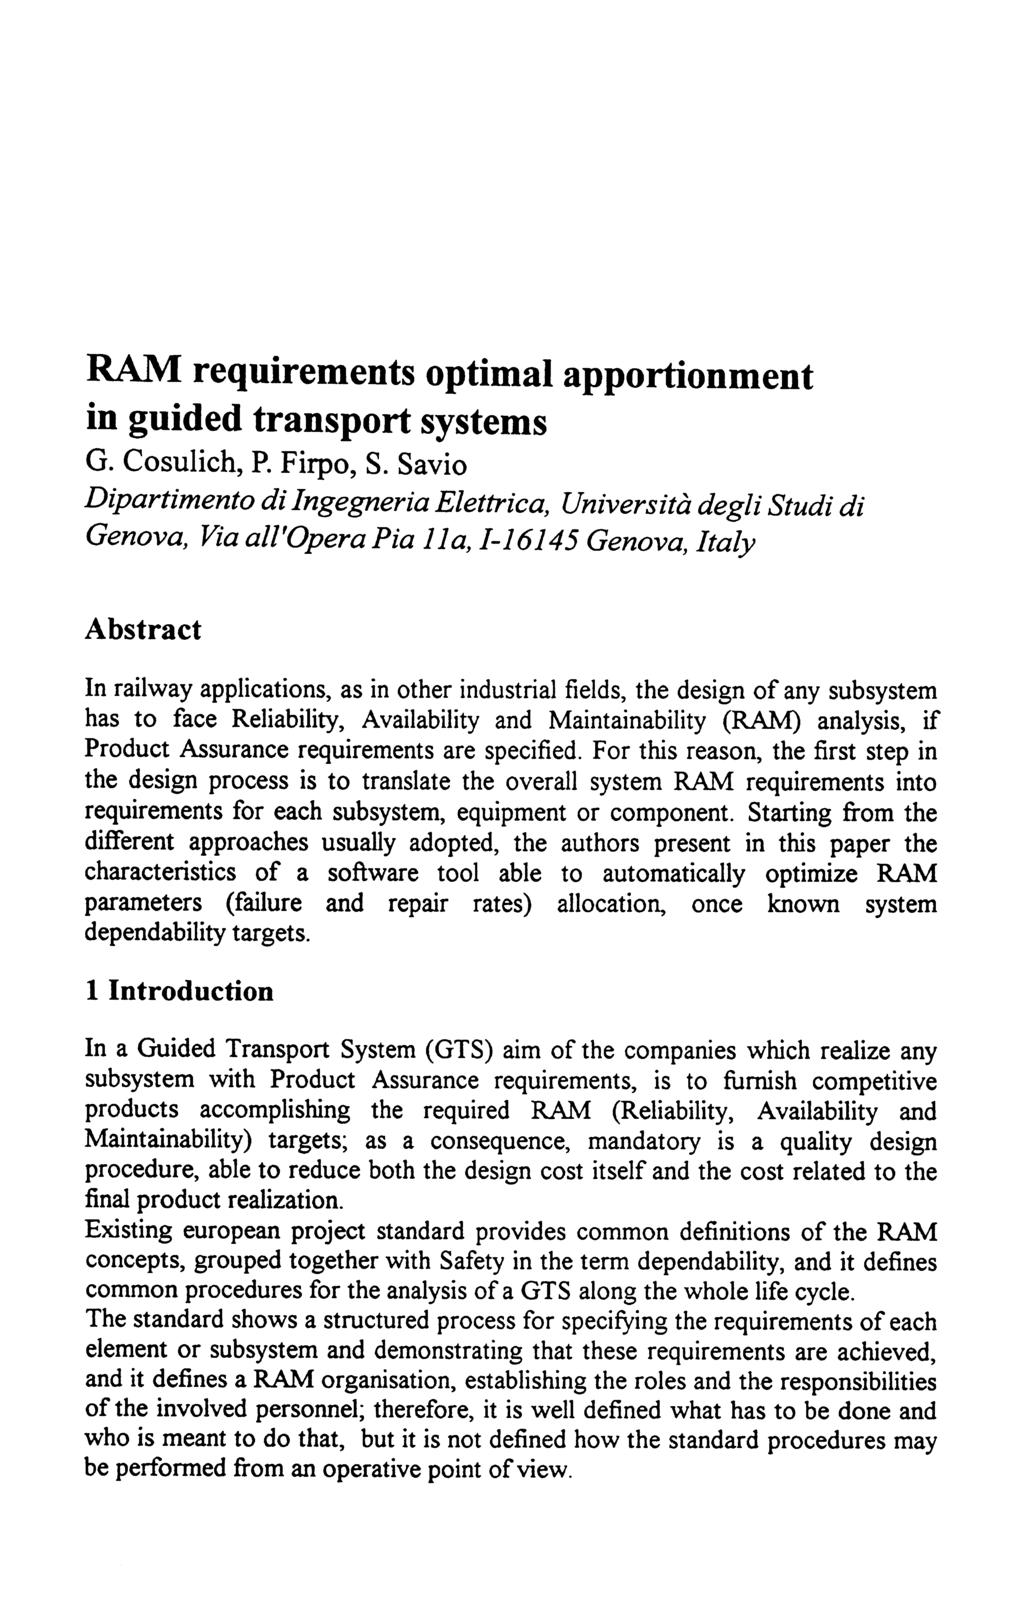 RAM requirements optimal apportionment in guided transport systems G. Cosulich, P. Firpo, S.